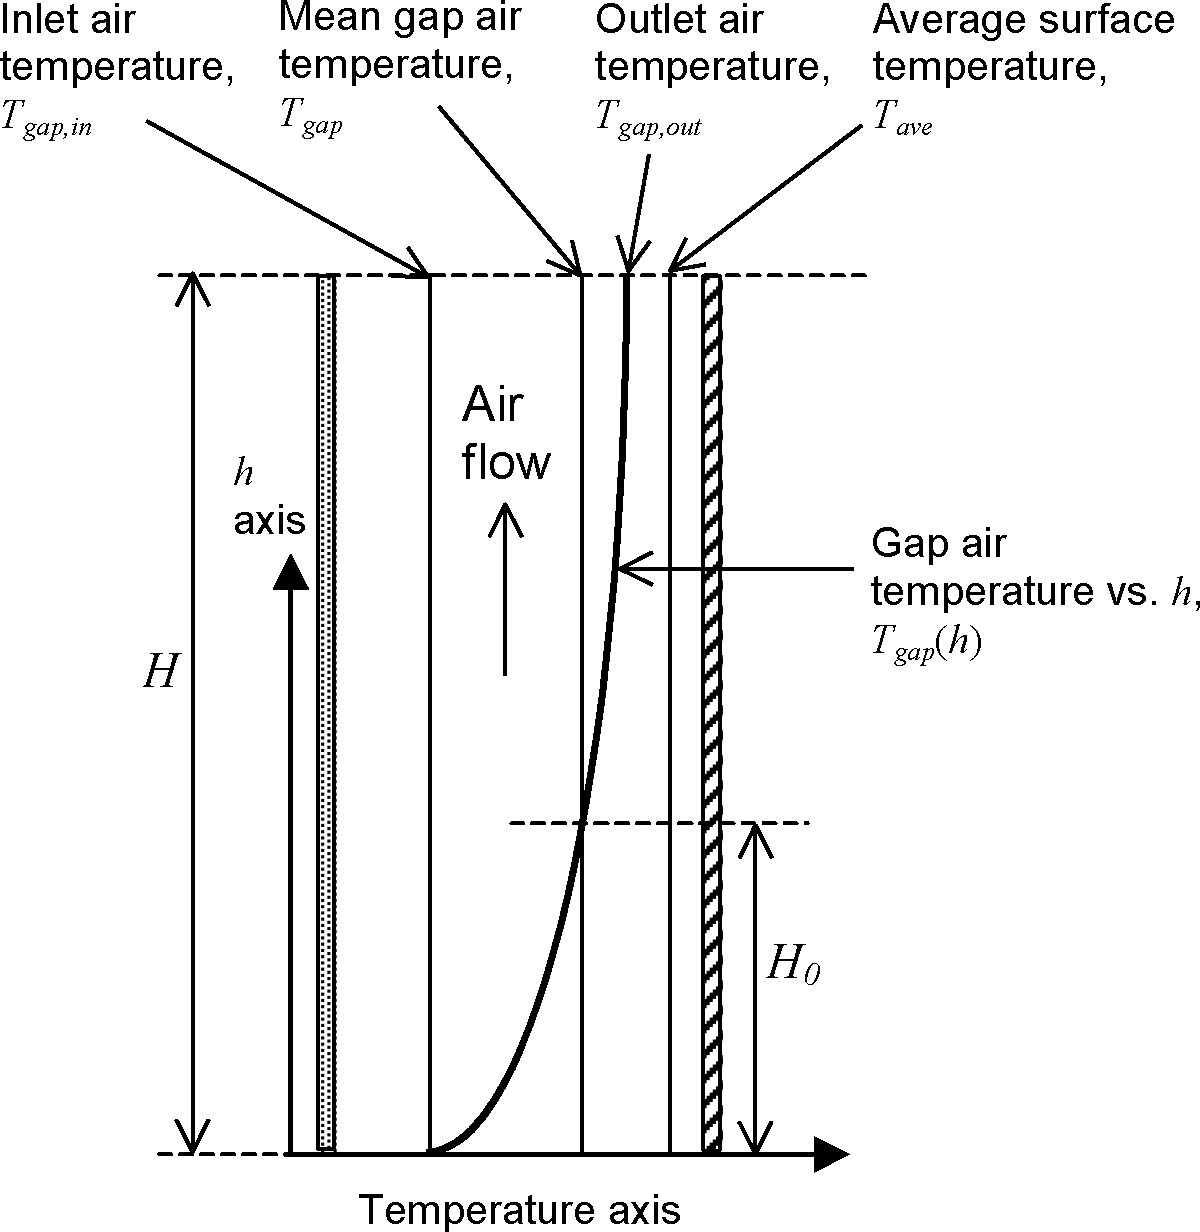 Variation of gap air temperature with distance from the inlet for upward flow.